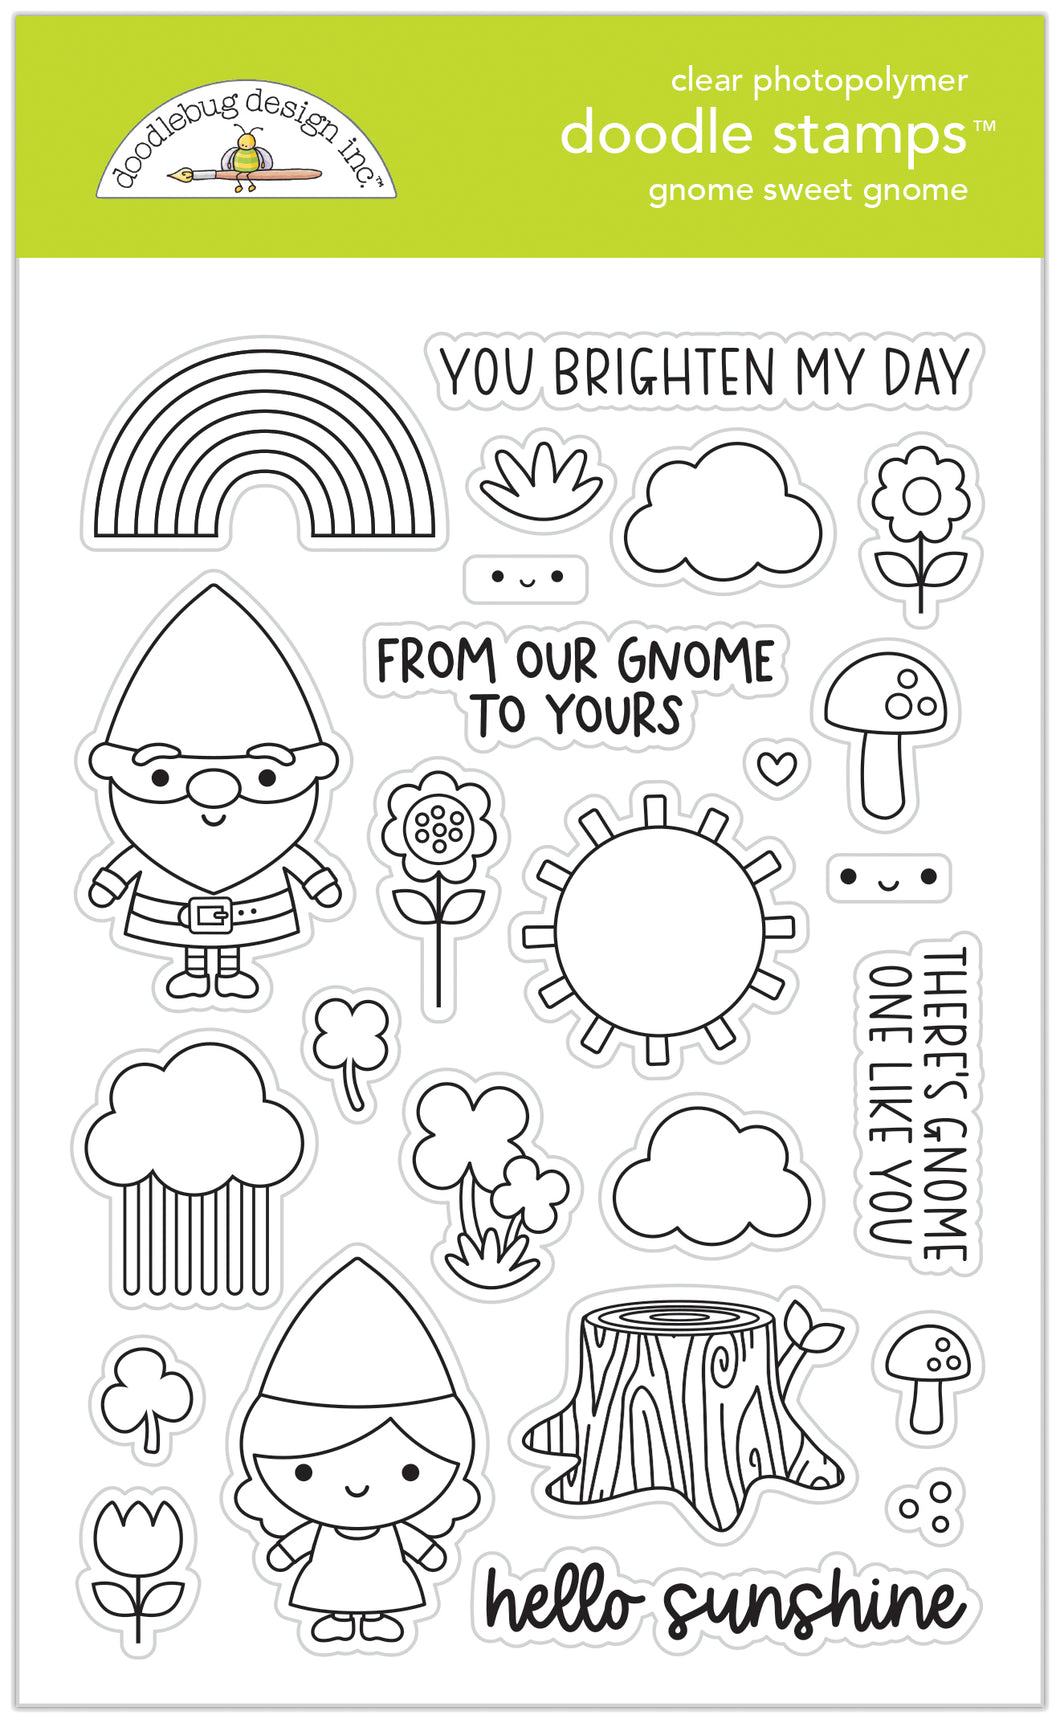 Doodlebug Over the Rainbow Gnome Sweet Gnome Doodle Stamps